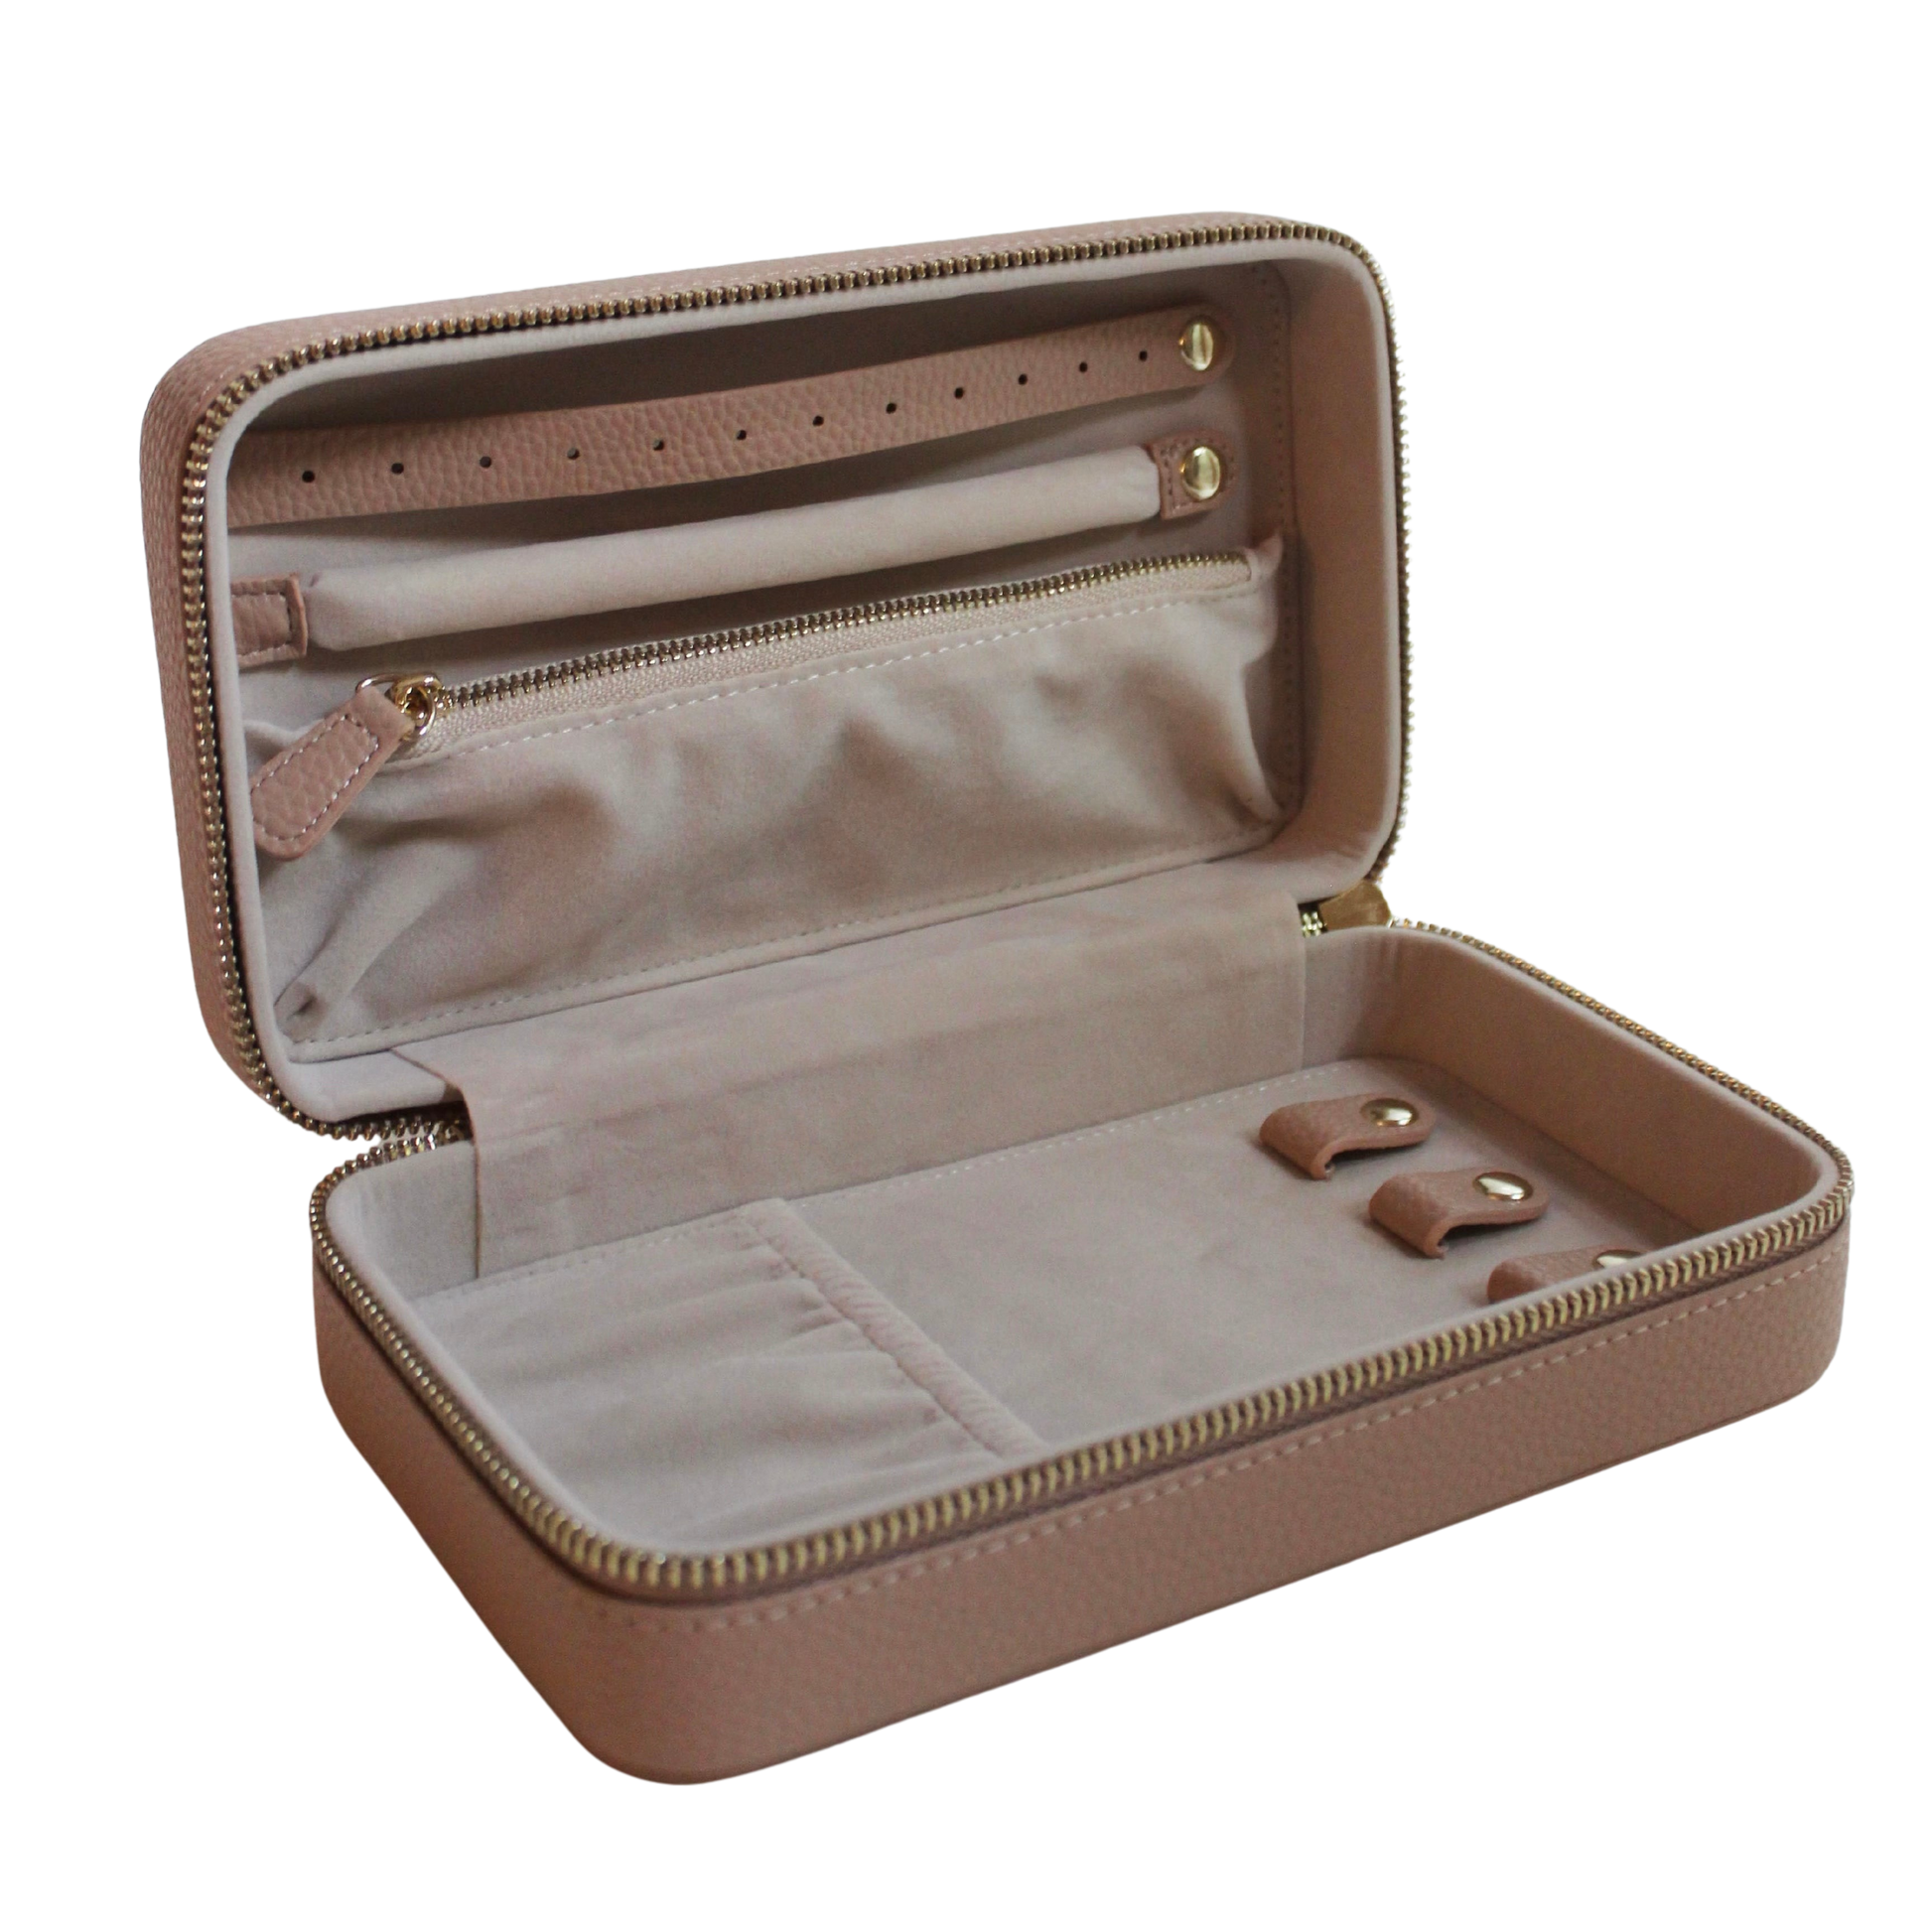 The Mish Essentials Case is the ideal organizer designed for everyone. Large enough to safekeep all your daily wear jewels along with other accessories. Most importantly, with an anti-tarnish suede lining on the interior we promise your jewels will last forever. 